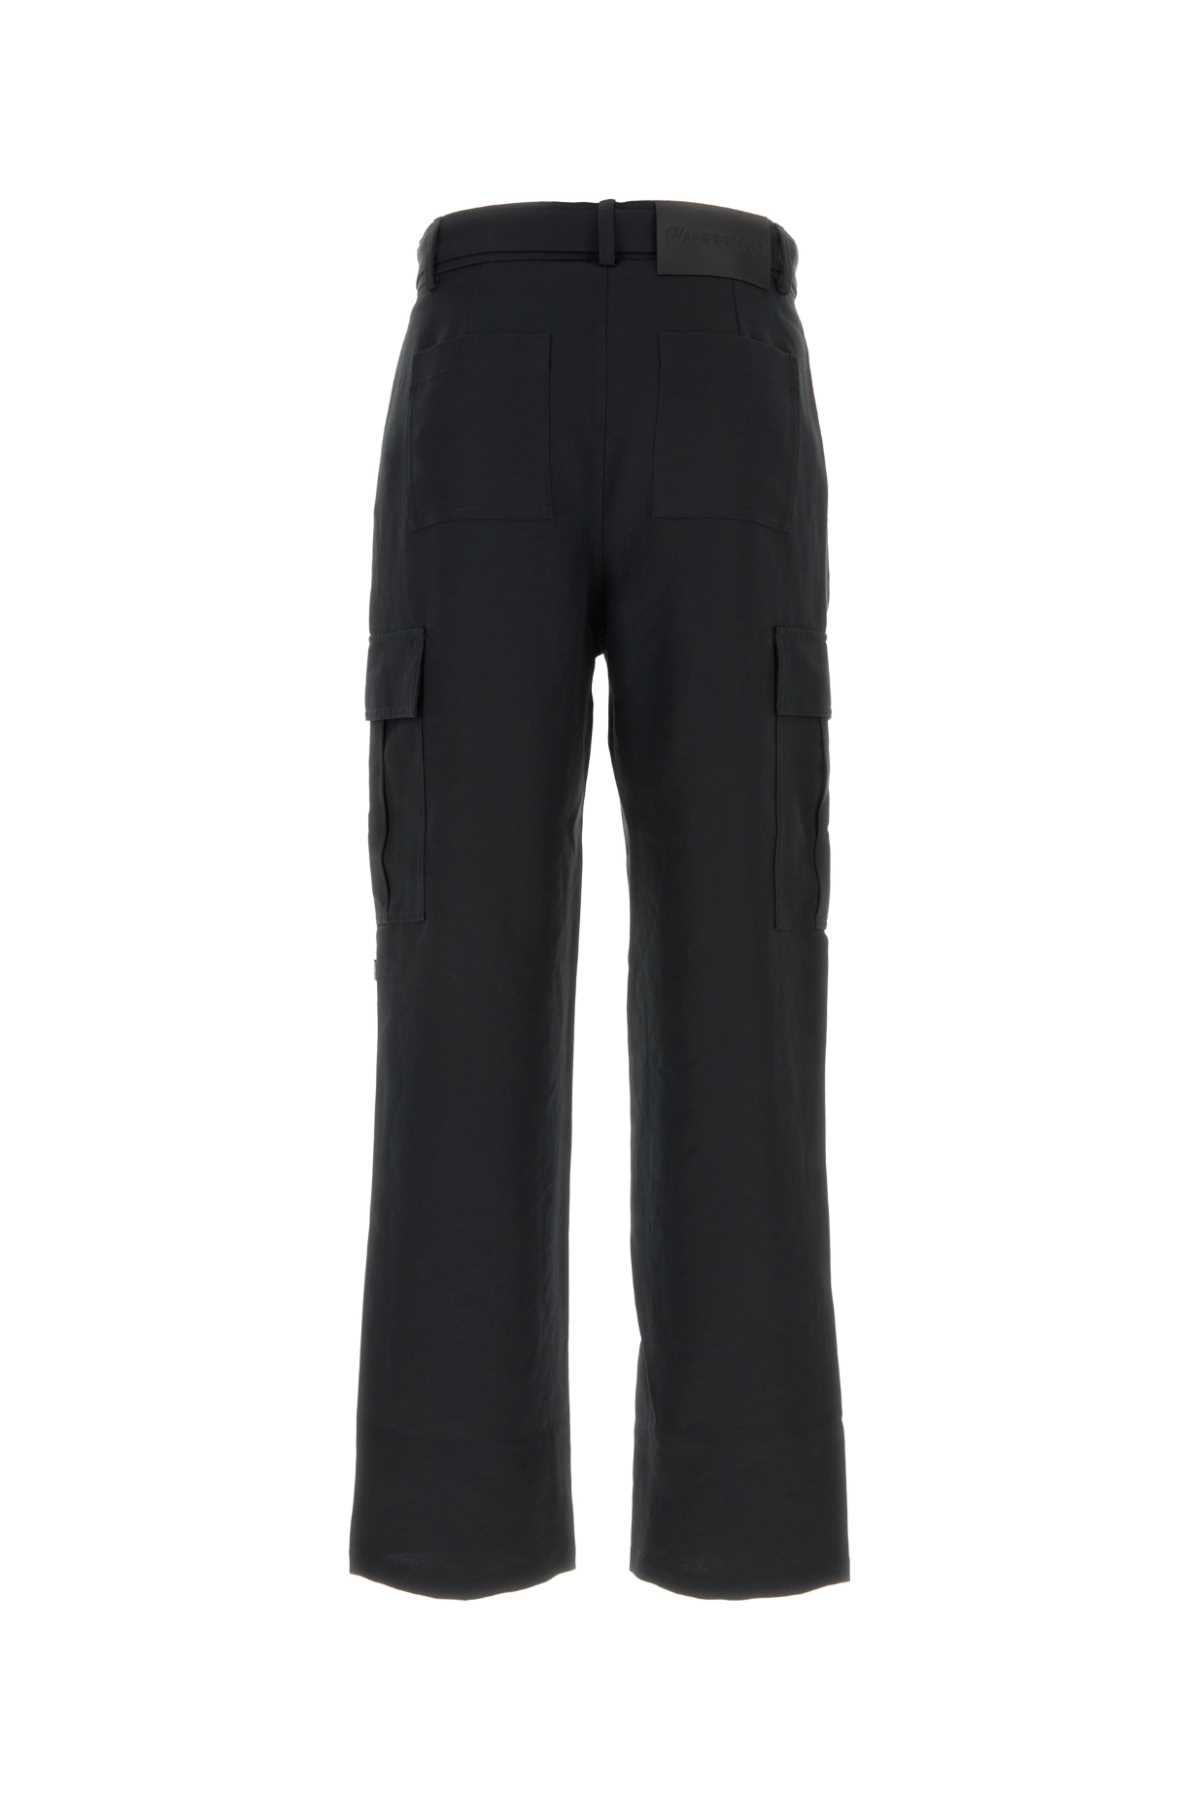 Jw Anderson Black Polyester Pant